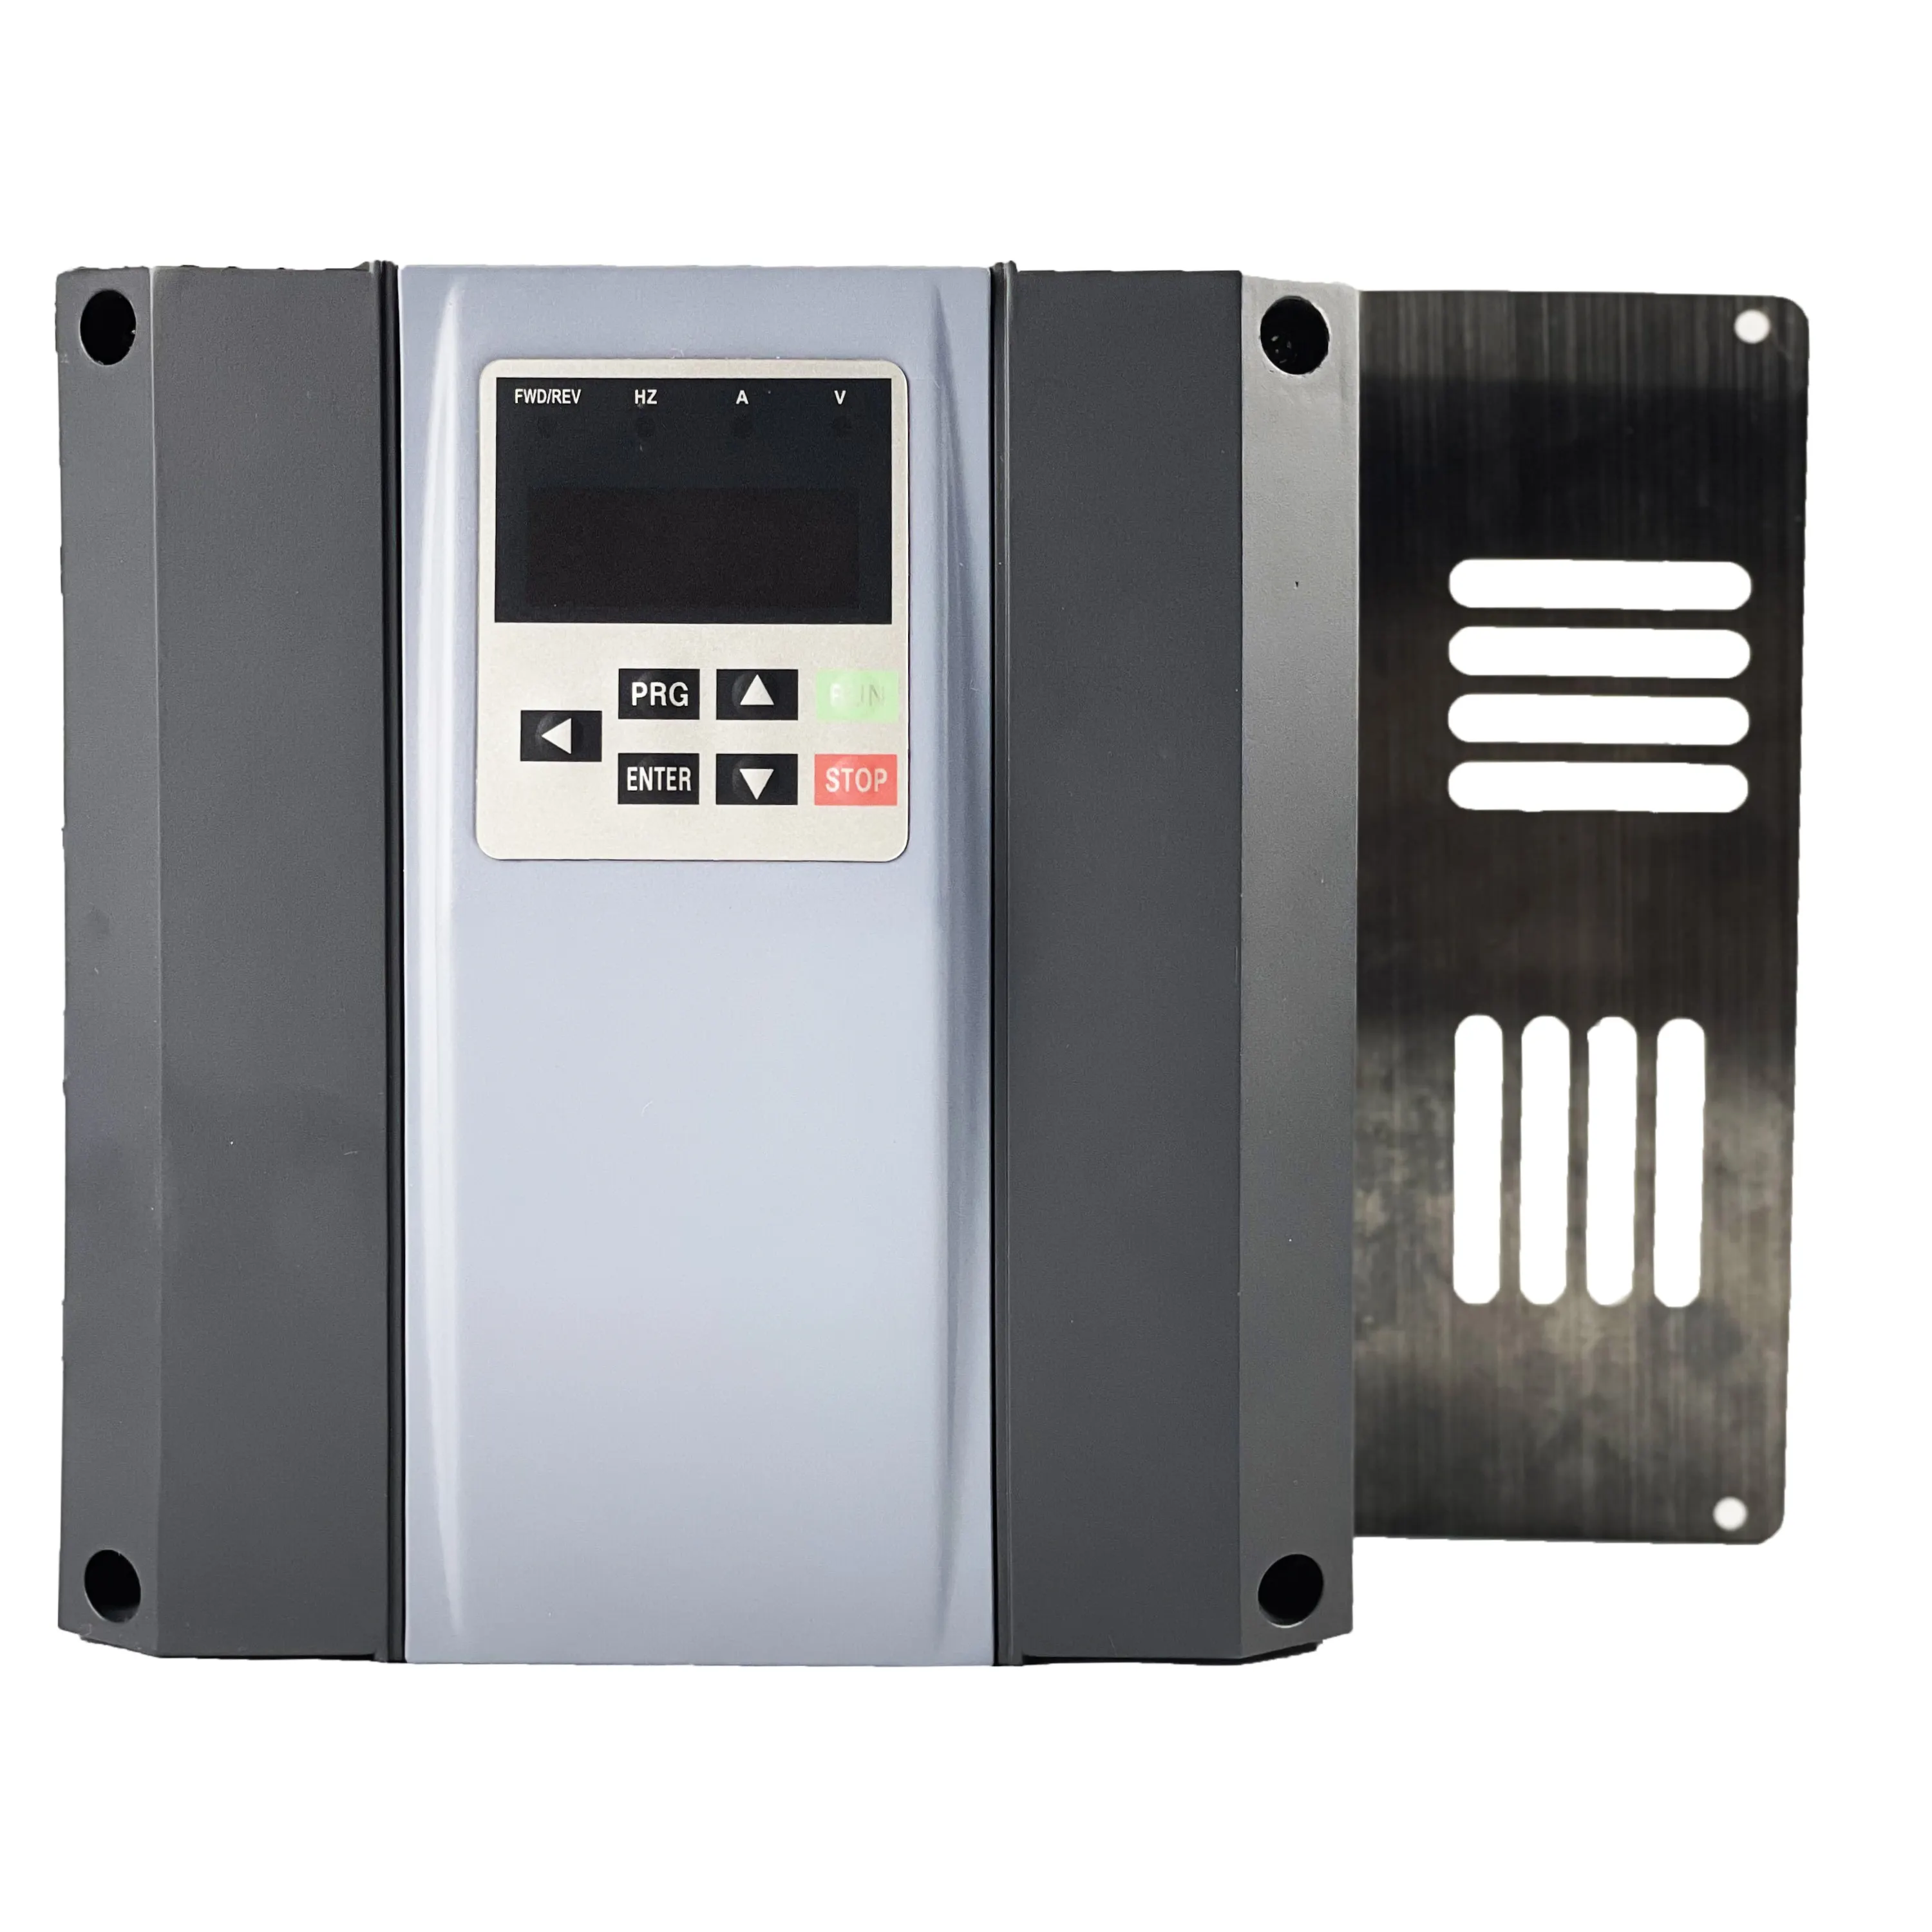 Intelligent Electric Vfd Durable Using Variable Speed Control Water Pump Frequency Converter 3 Phase